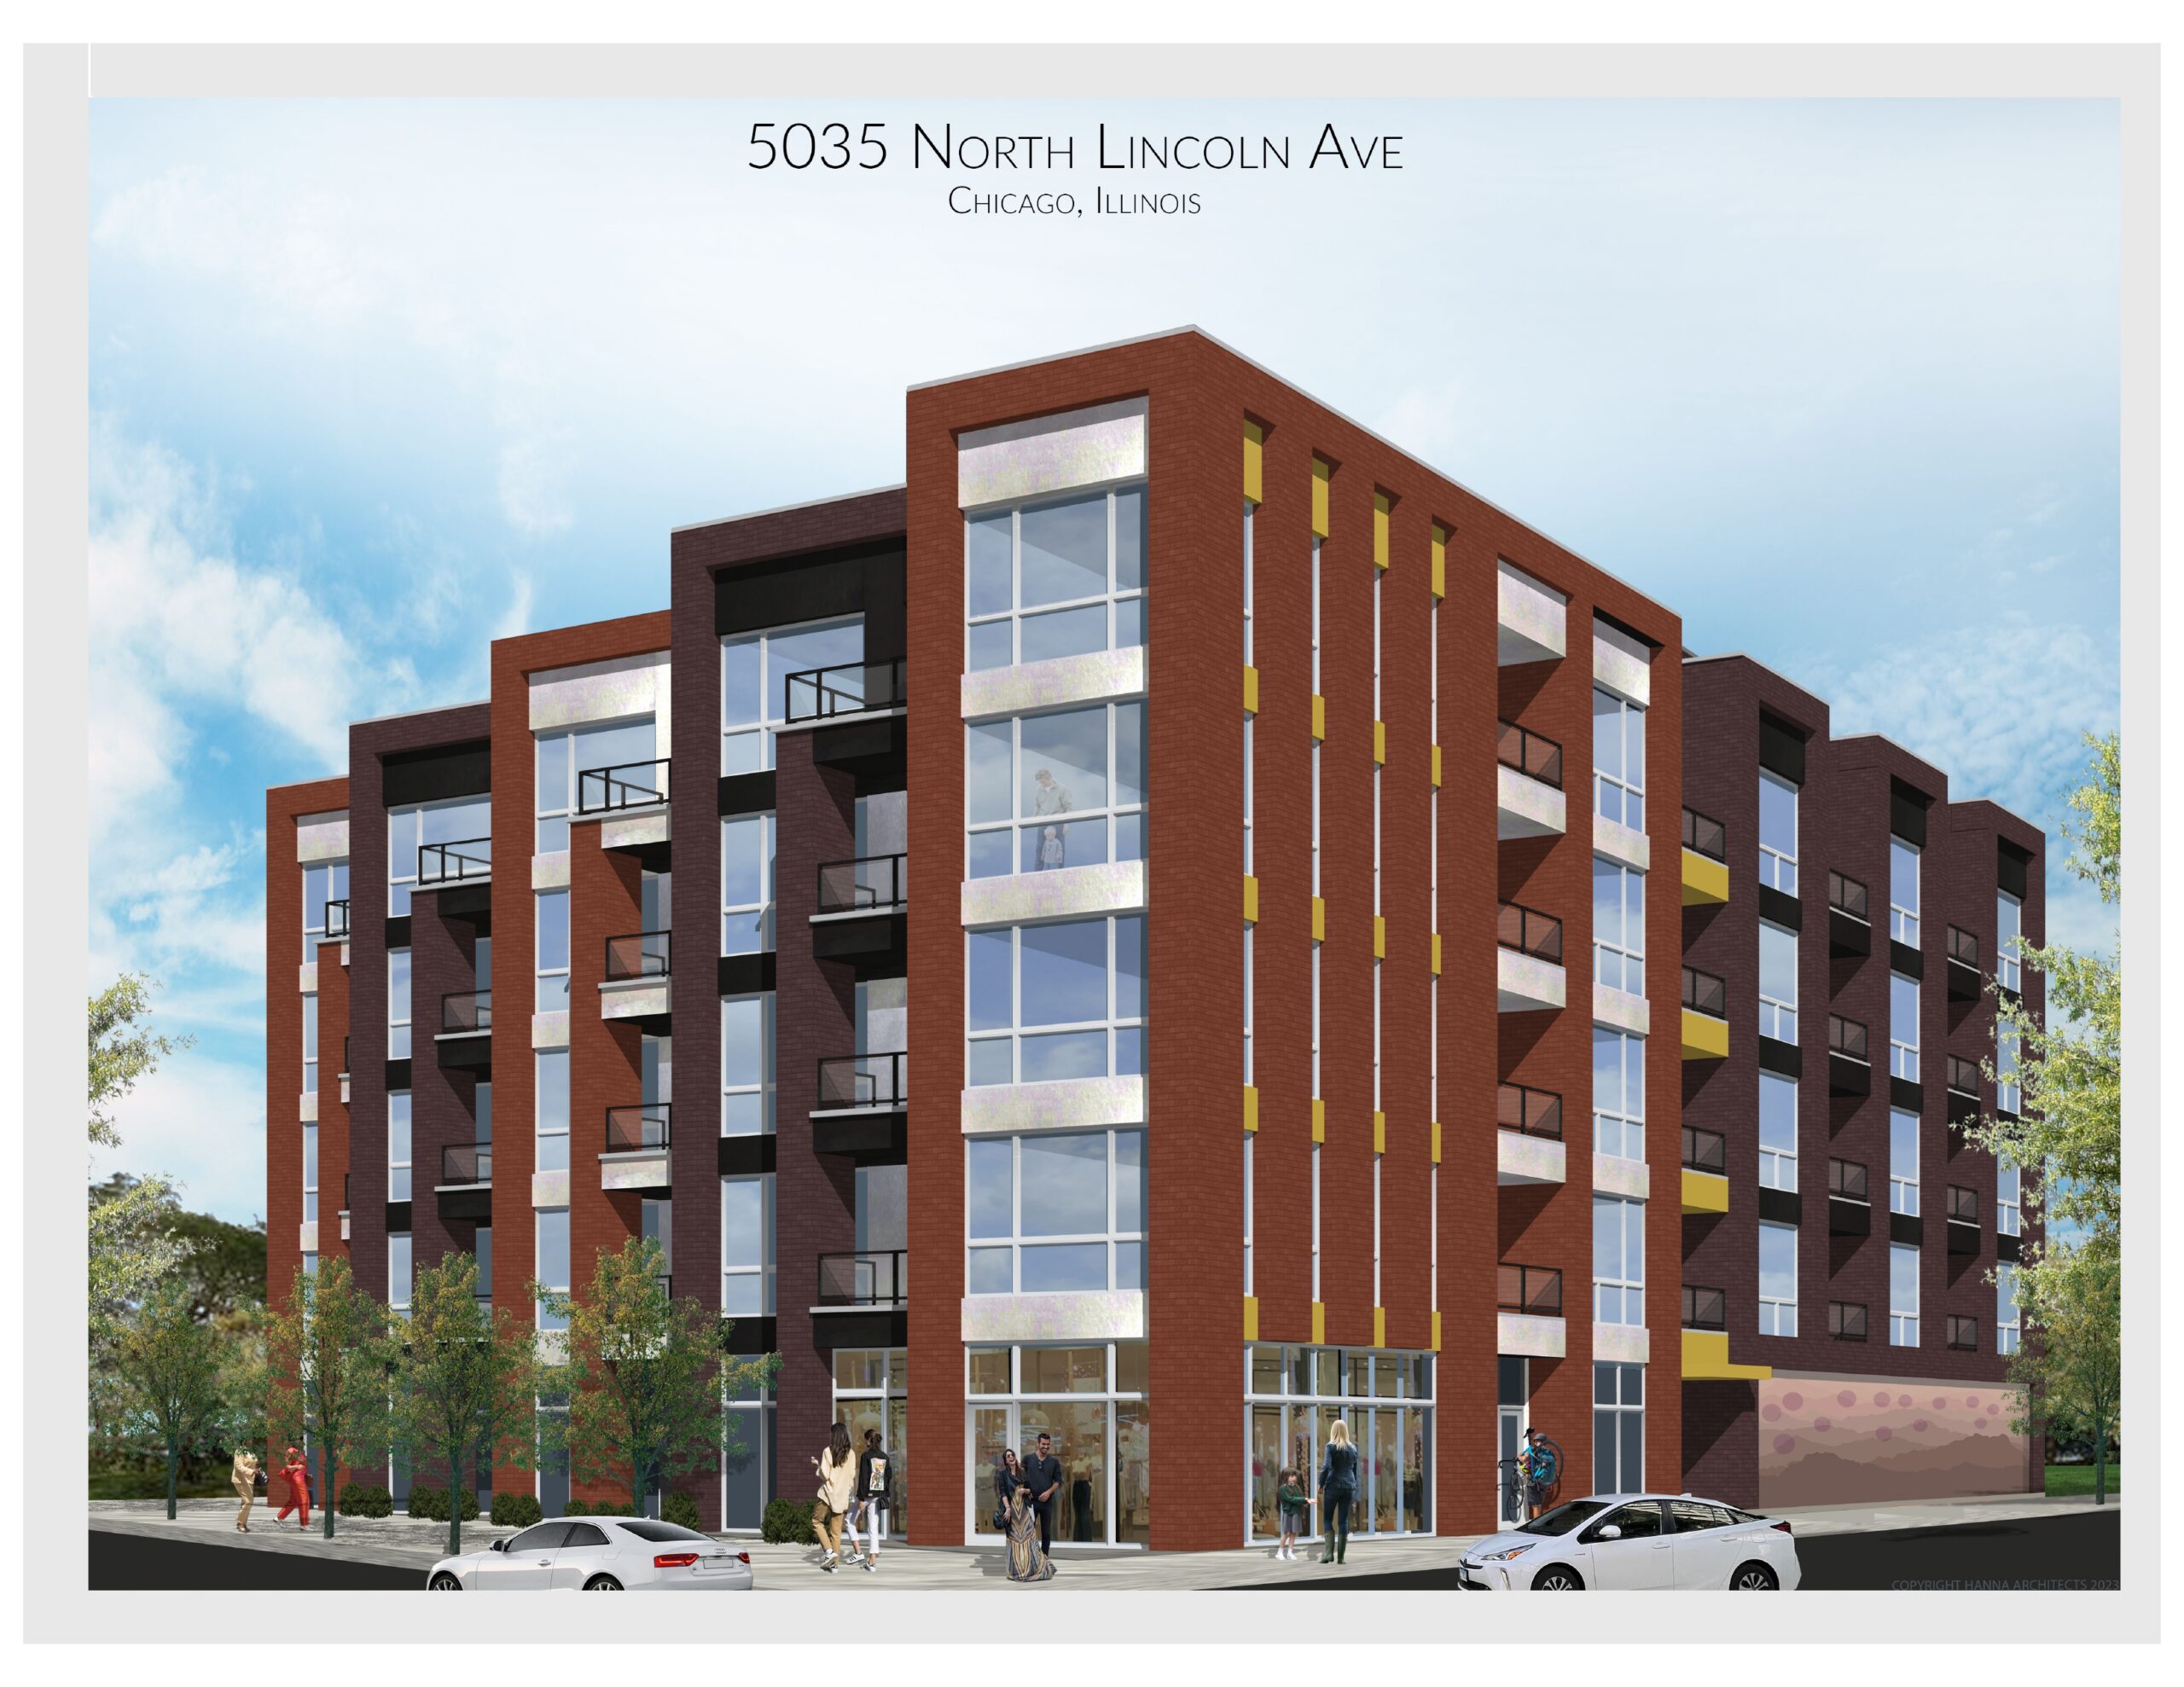 Rendering of the proposed development of 5035 N. Lincoln: a five-story brick building.